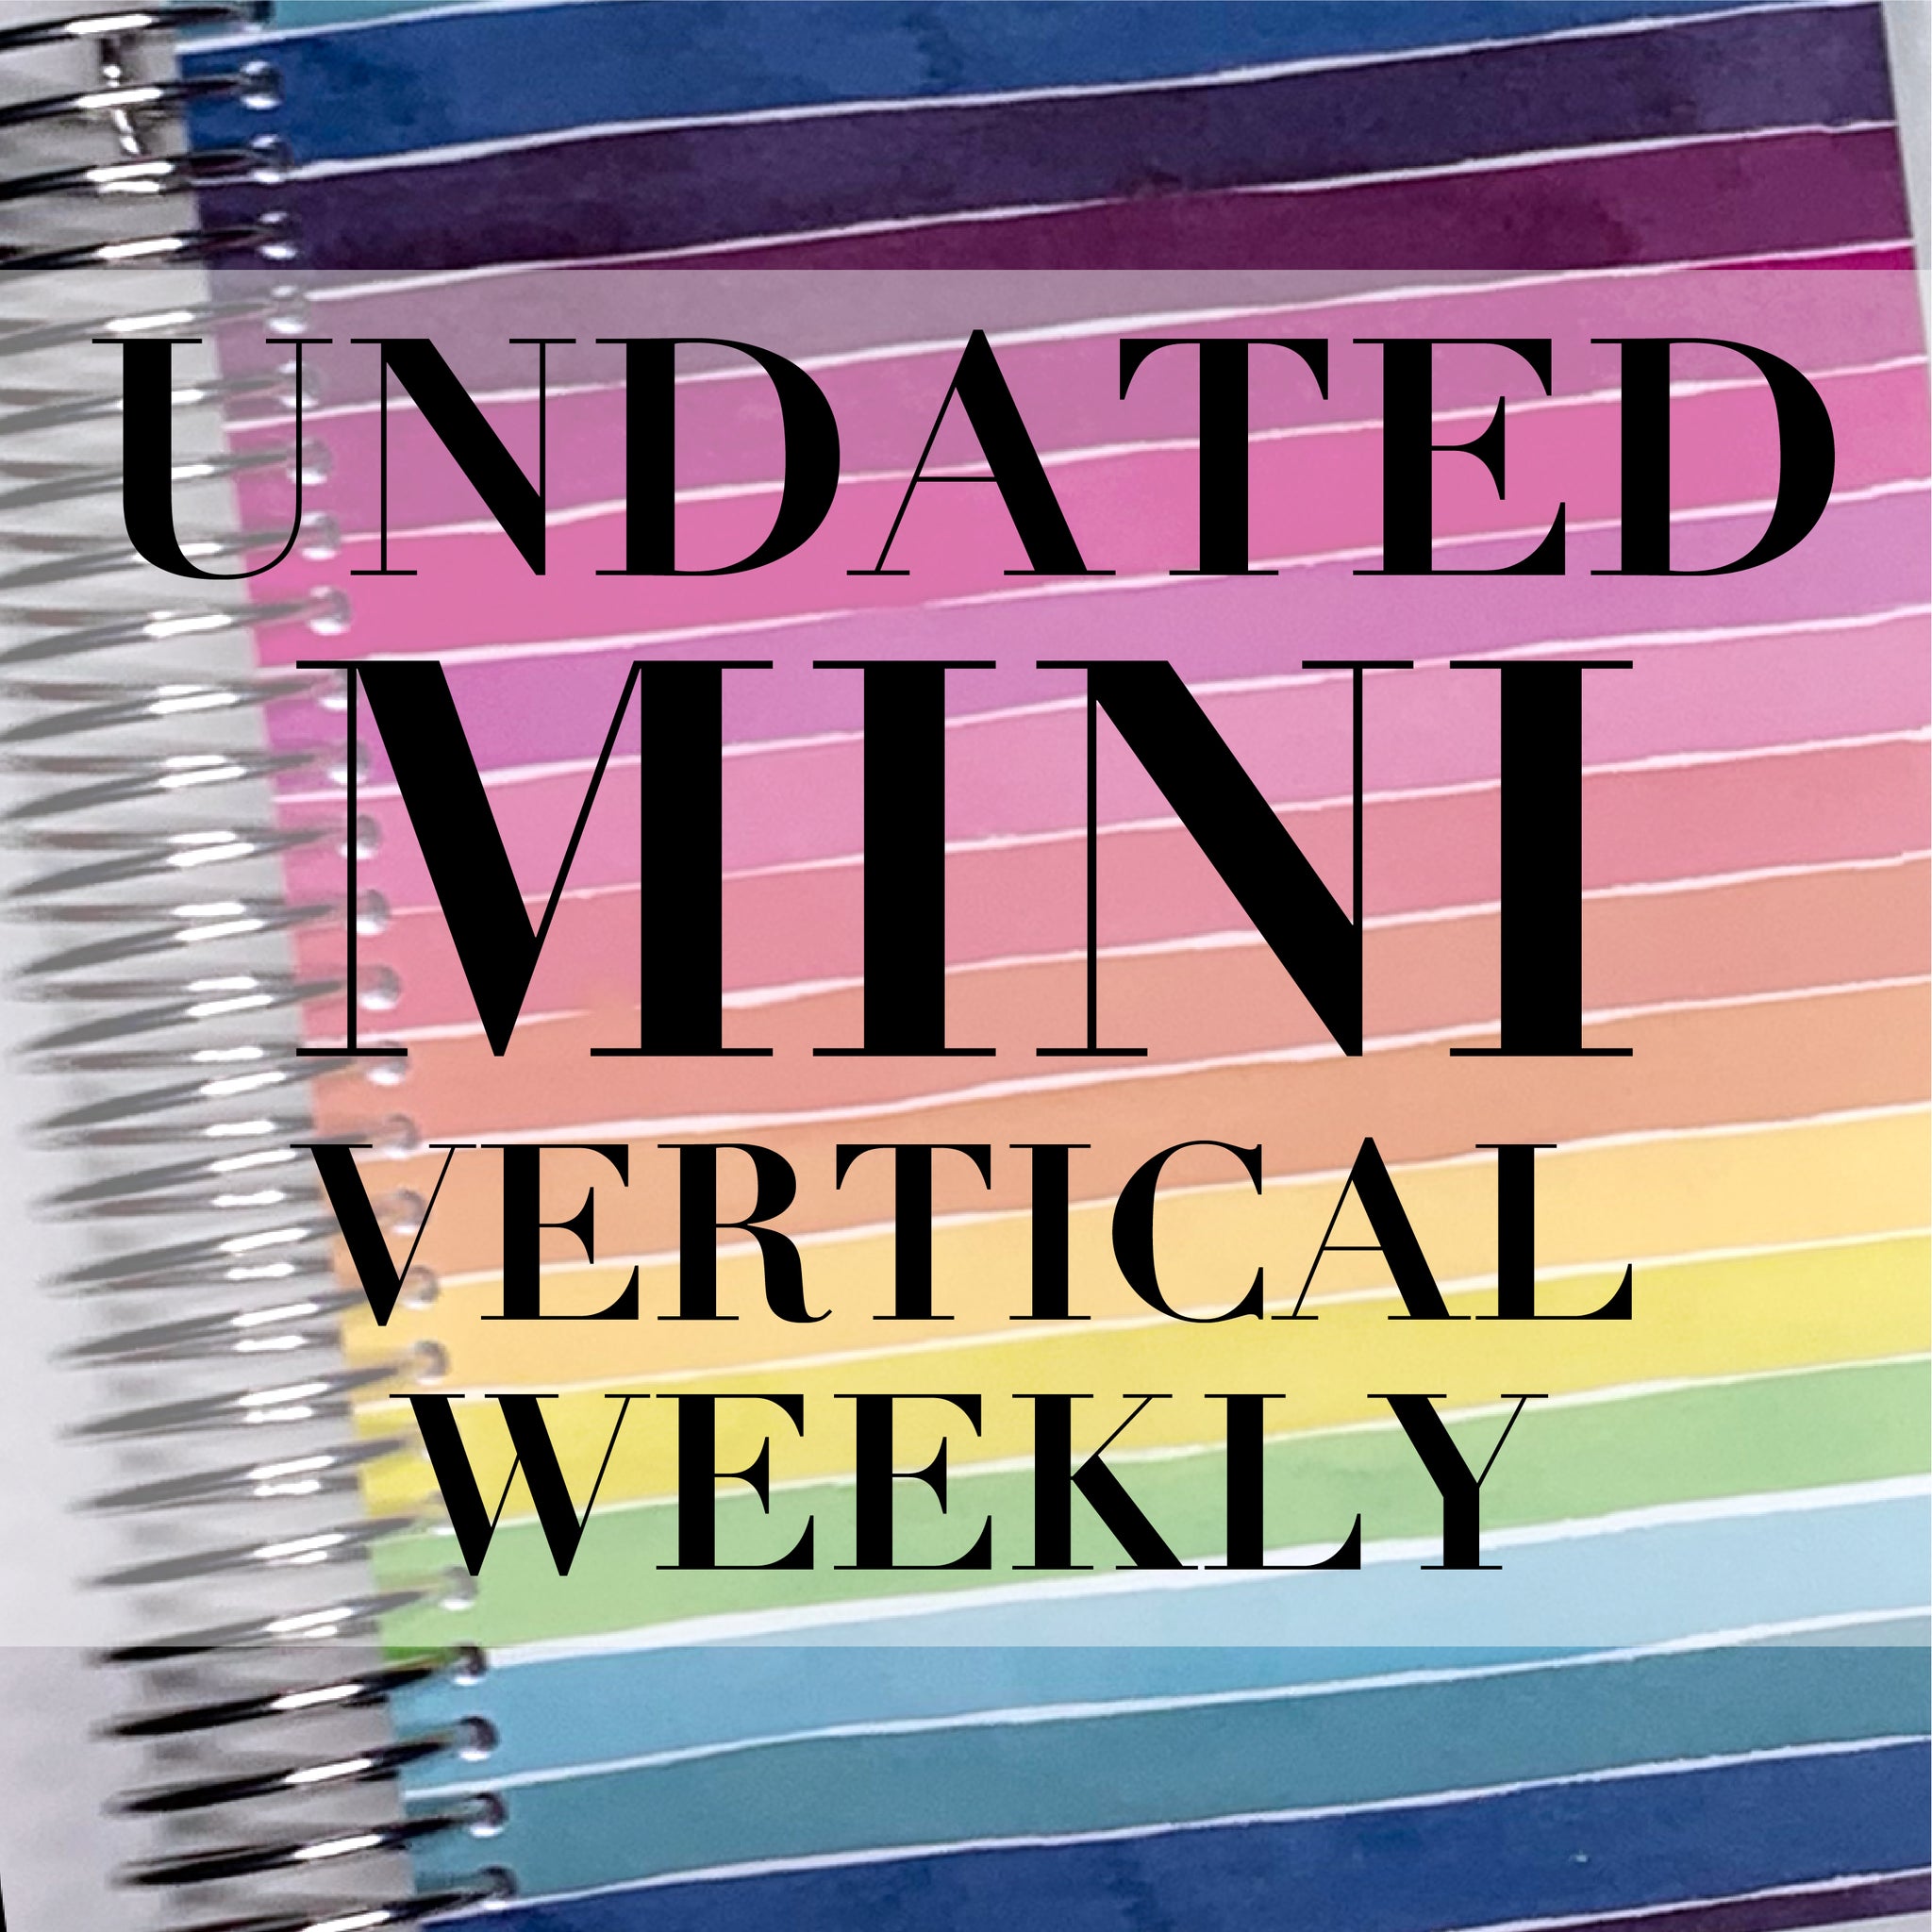 Undated Vertical Weekly Overview – Rosie Papeterie